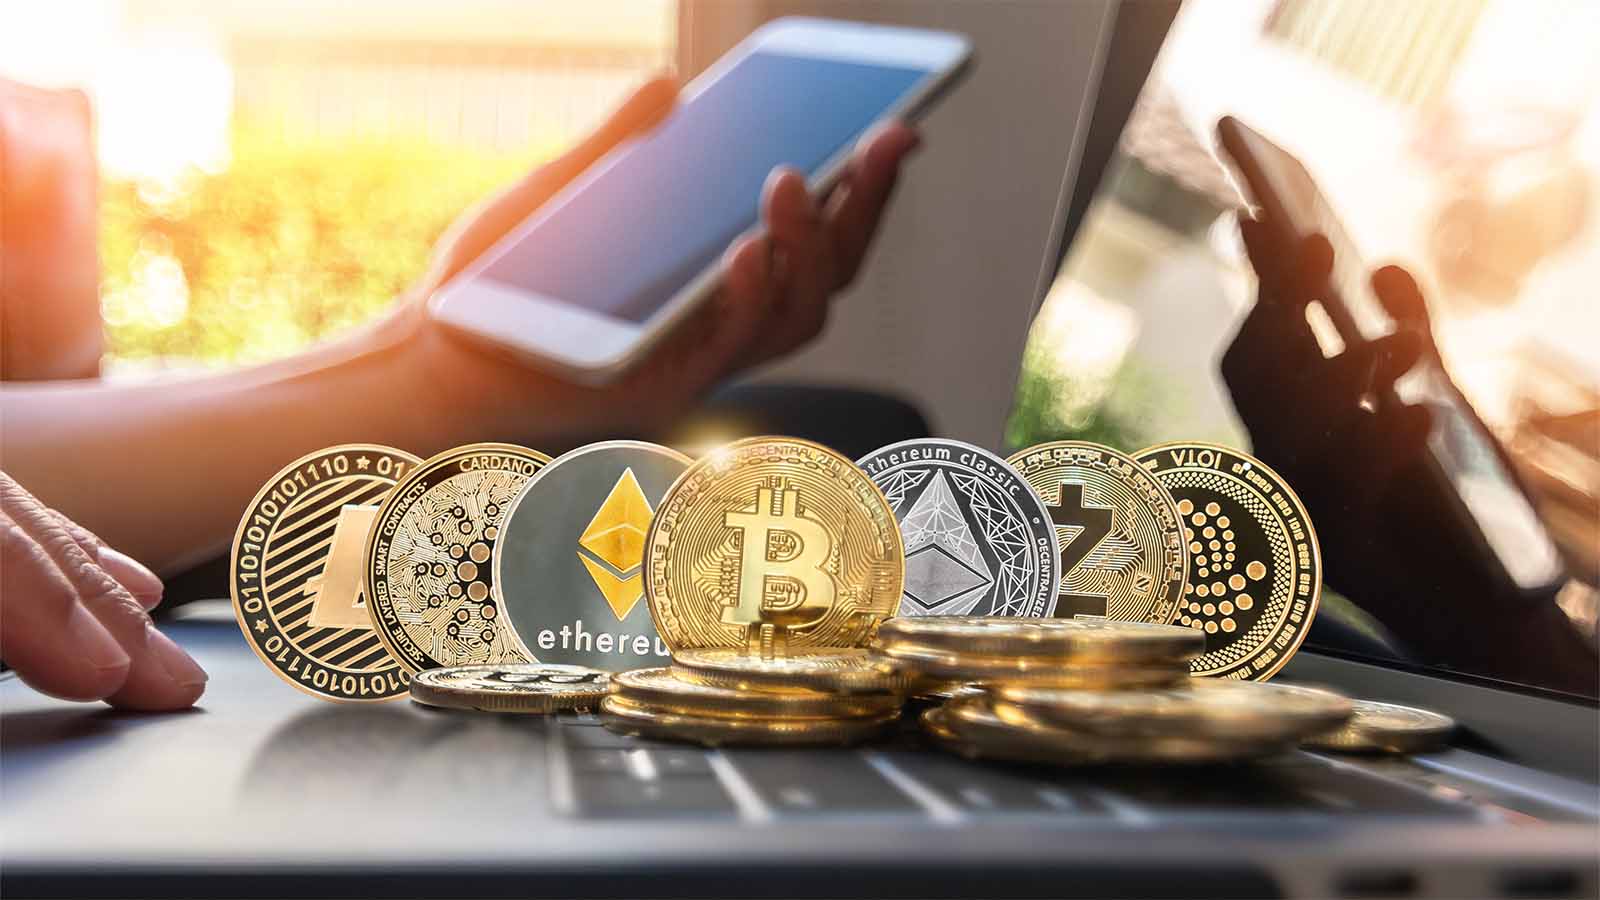 Choose your crypto betting coin wisely